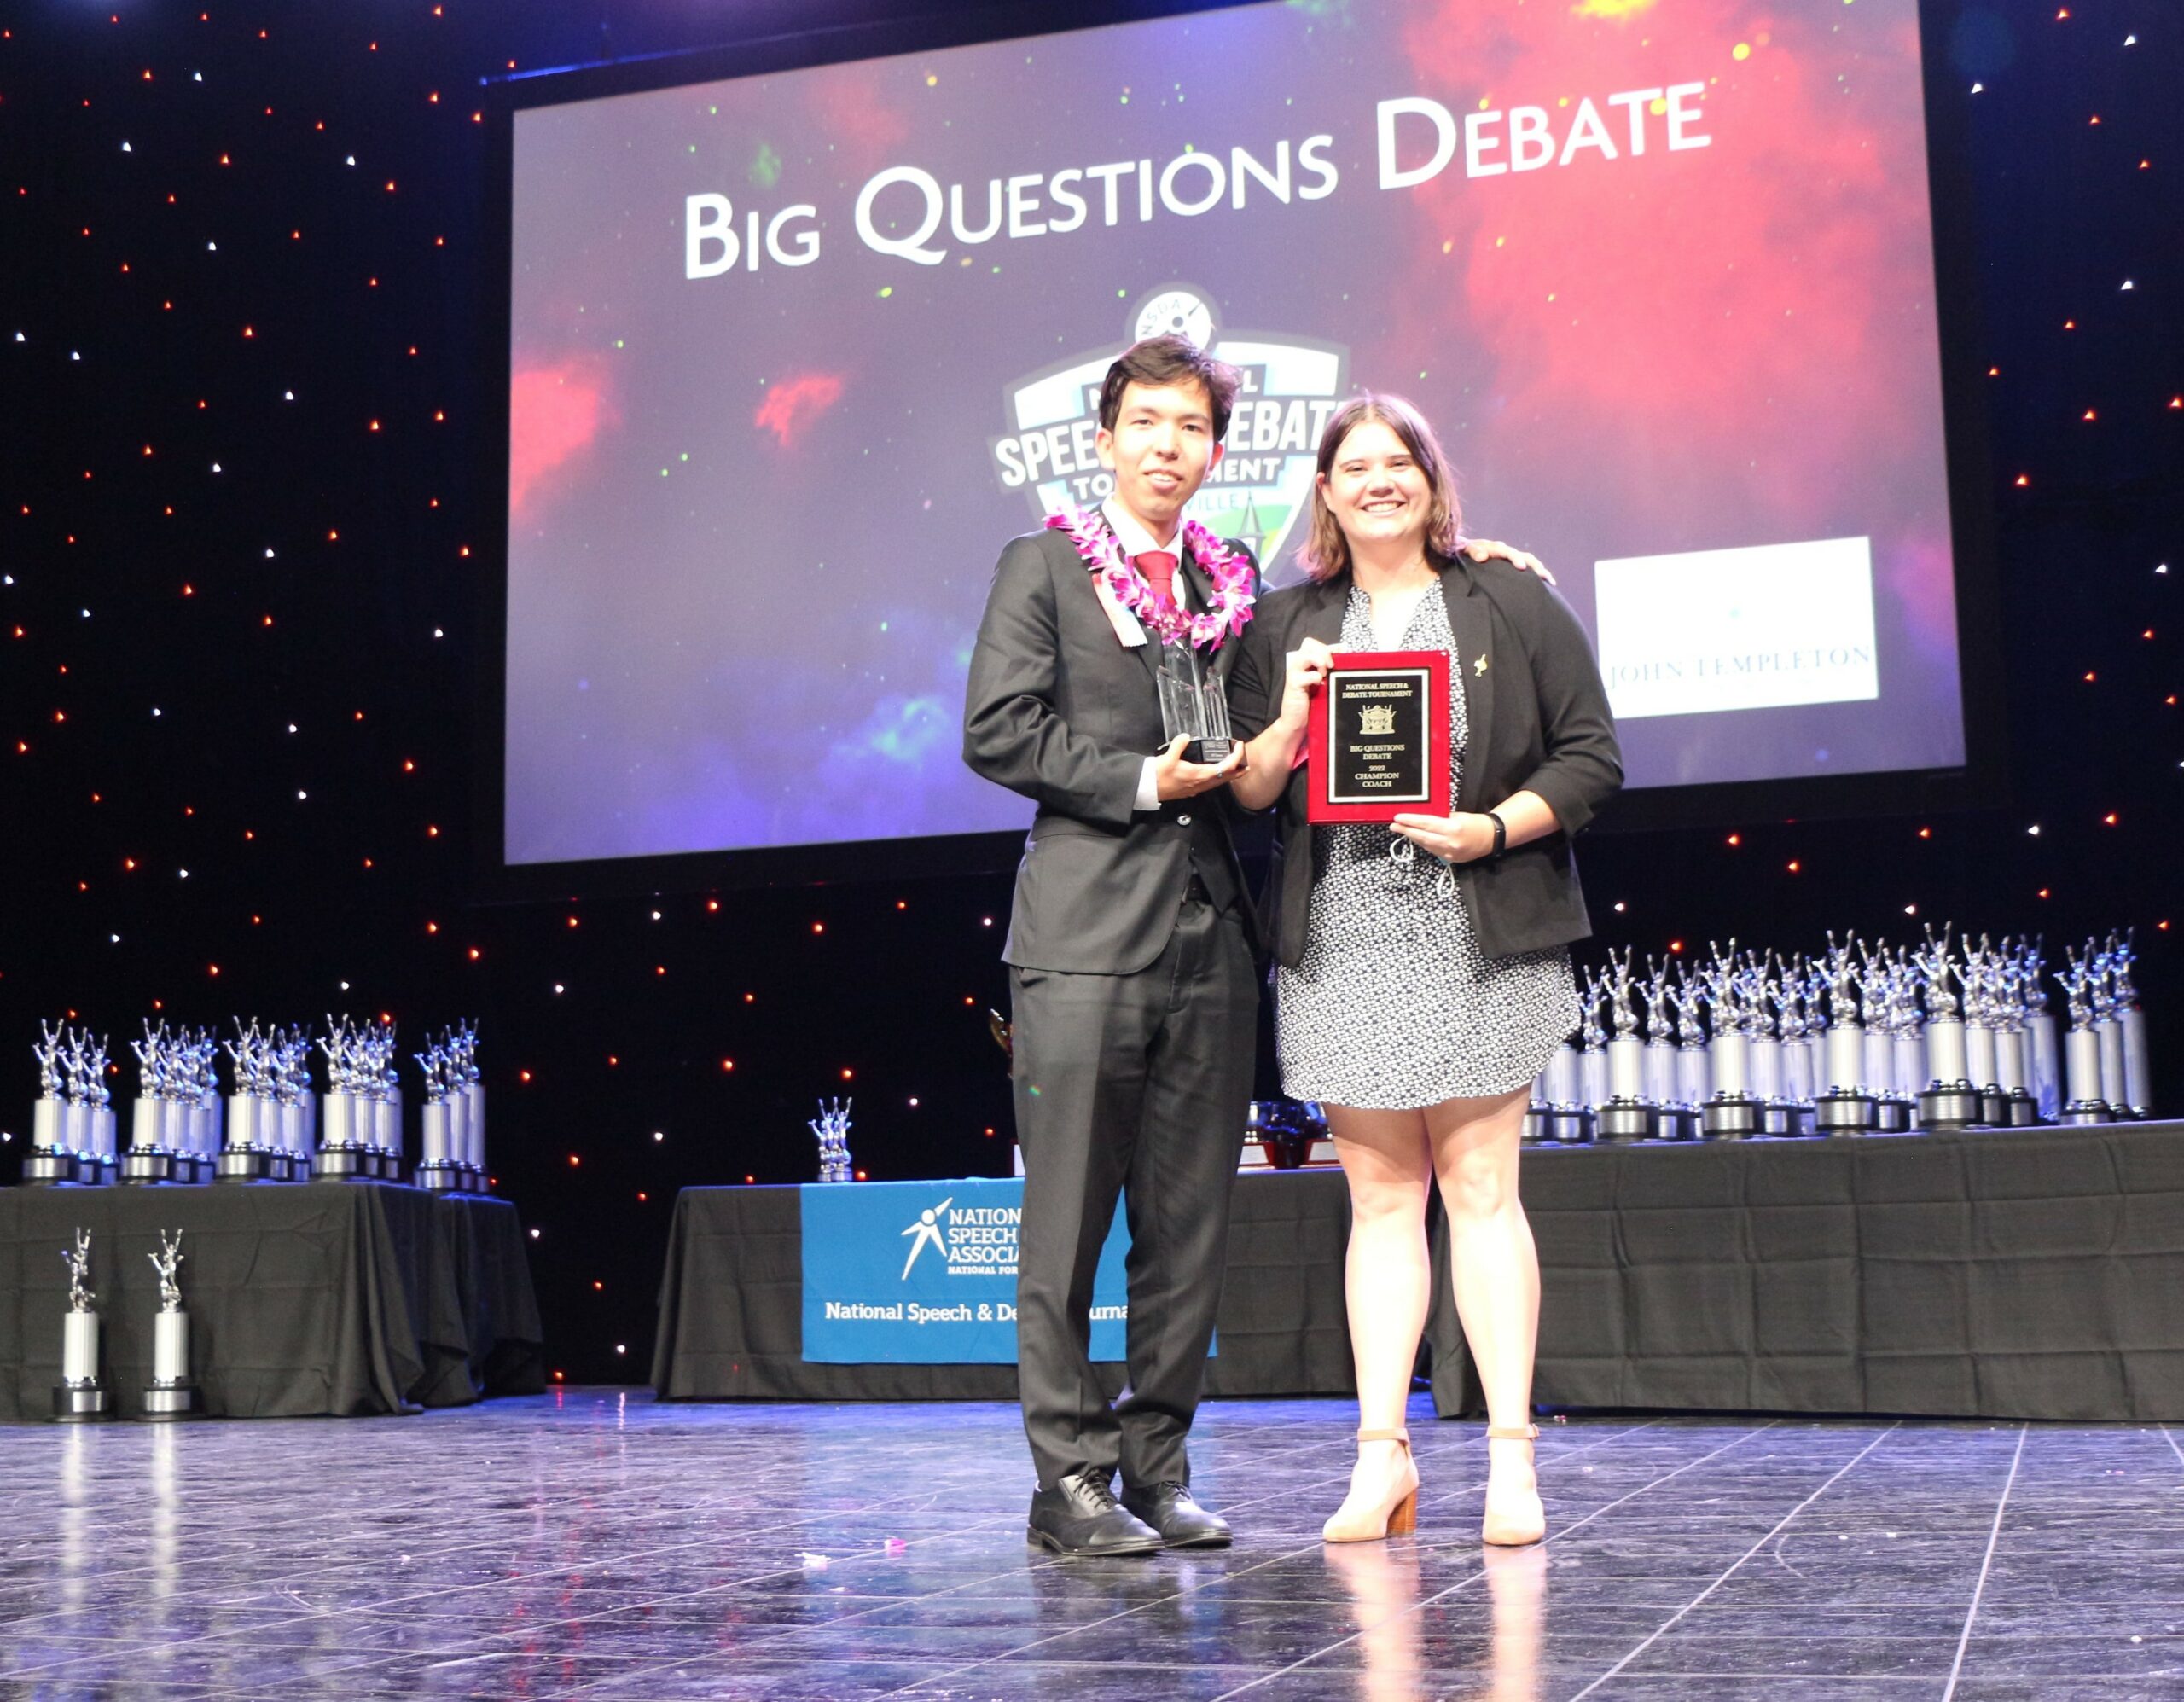 Wilson advances to national debate finals – The Sentry